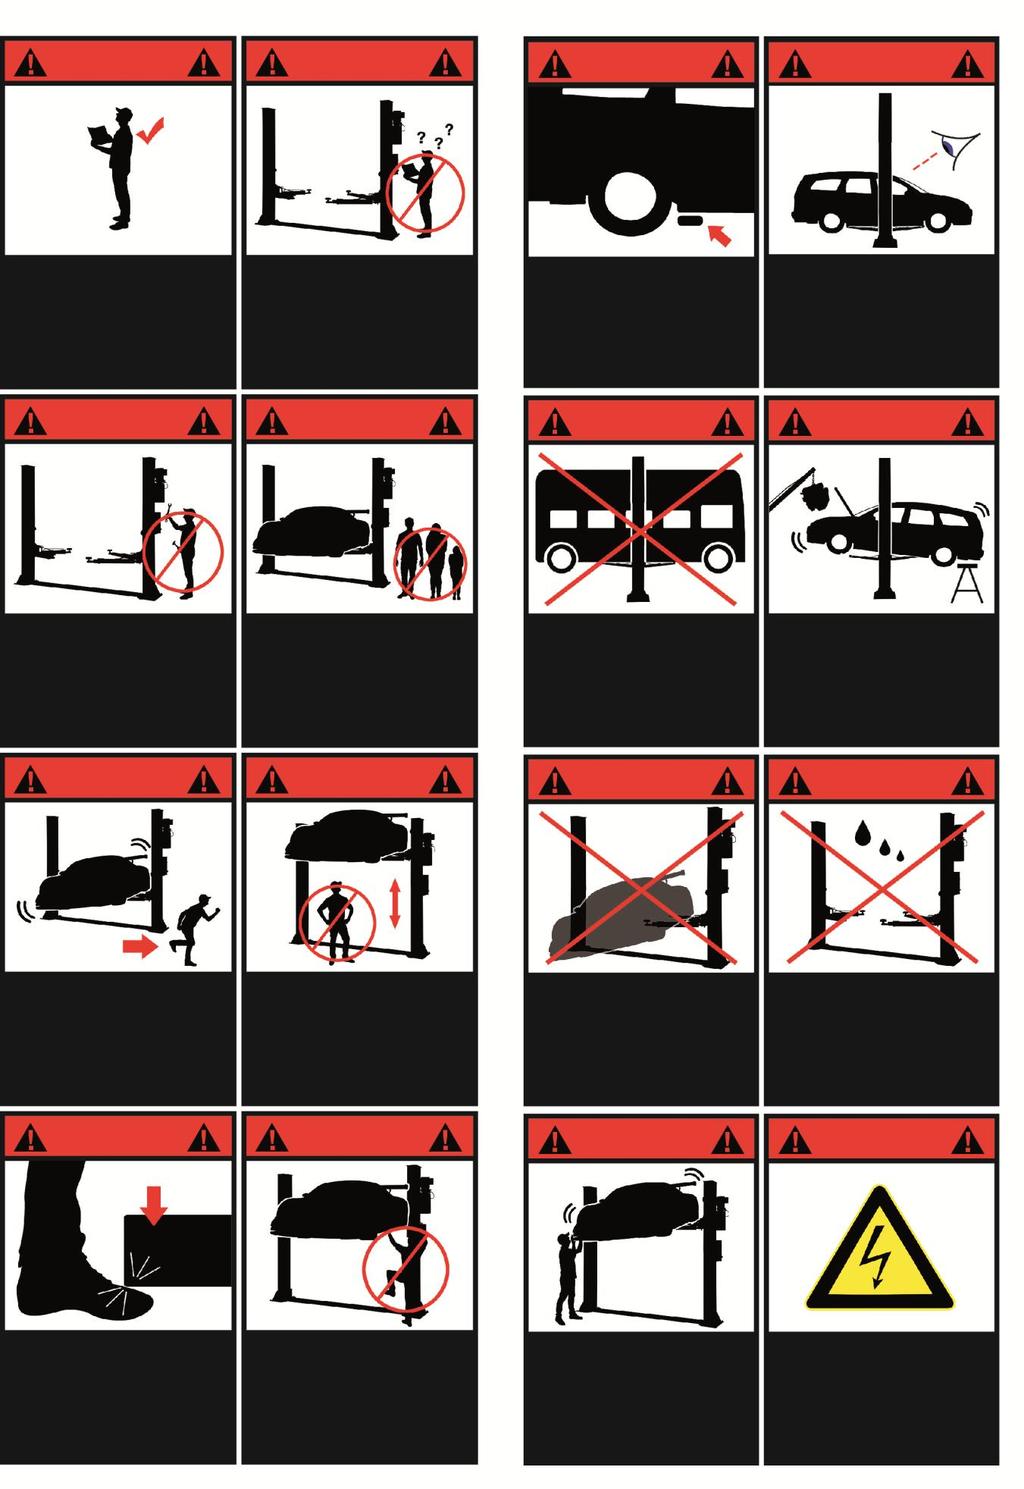 1.5 Warning signs All safety warning signs attached on the machine are for the purpose of drawing the user s attention to safety operation.